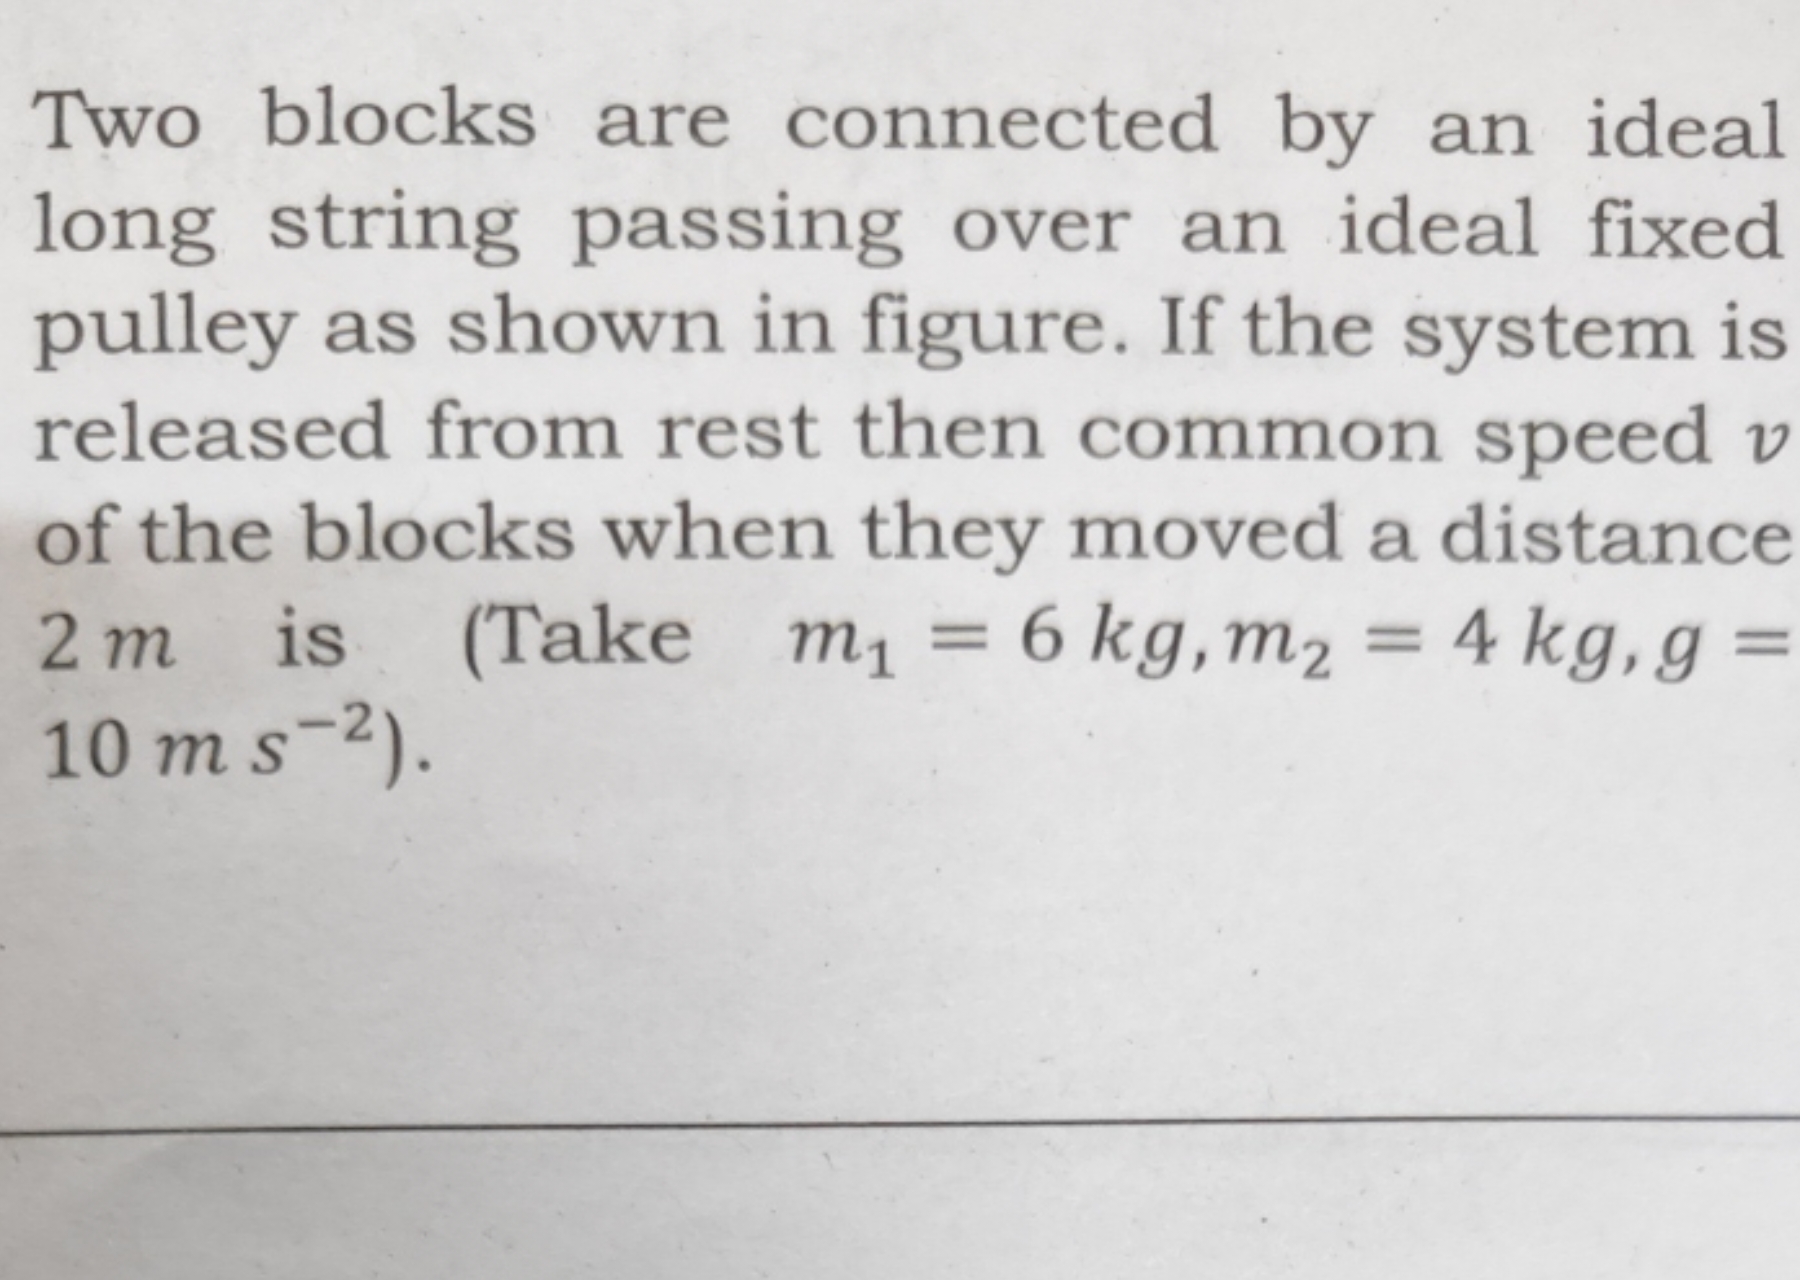 Two blocks are connected by an ideal long string passing over an ideal